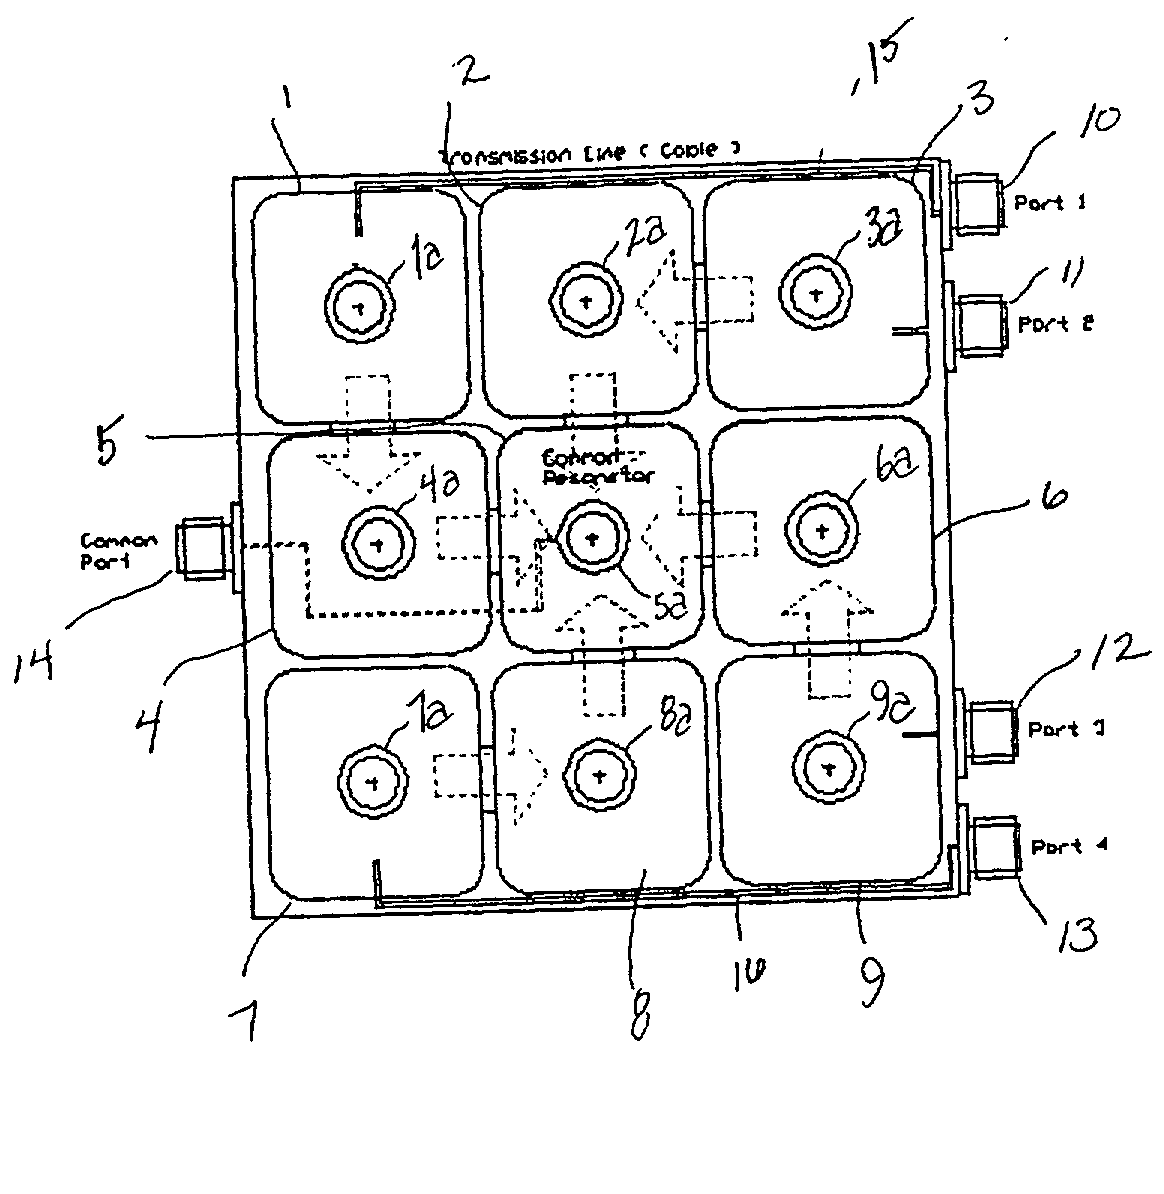 Multi-channel frequency multiplexer with small dimension